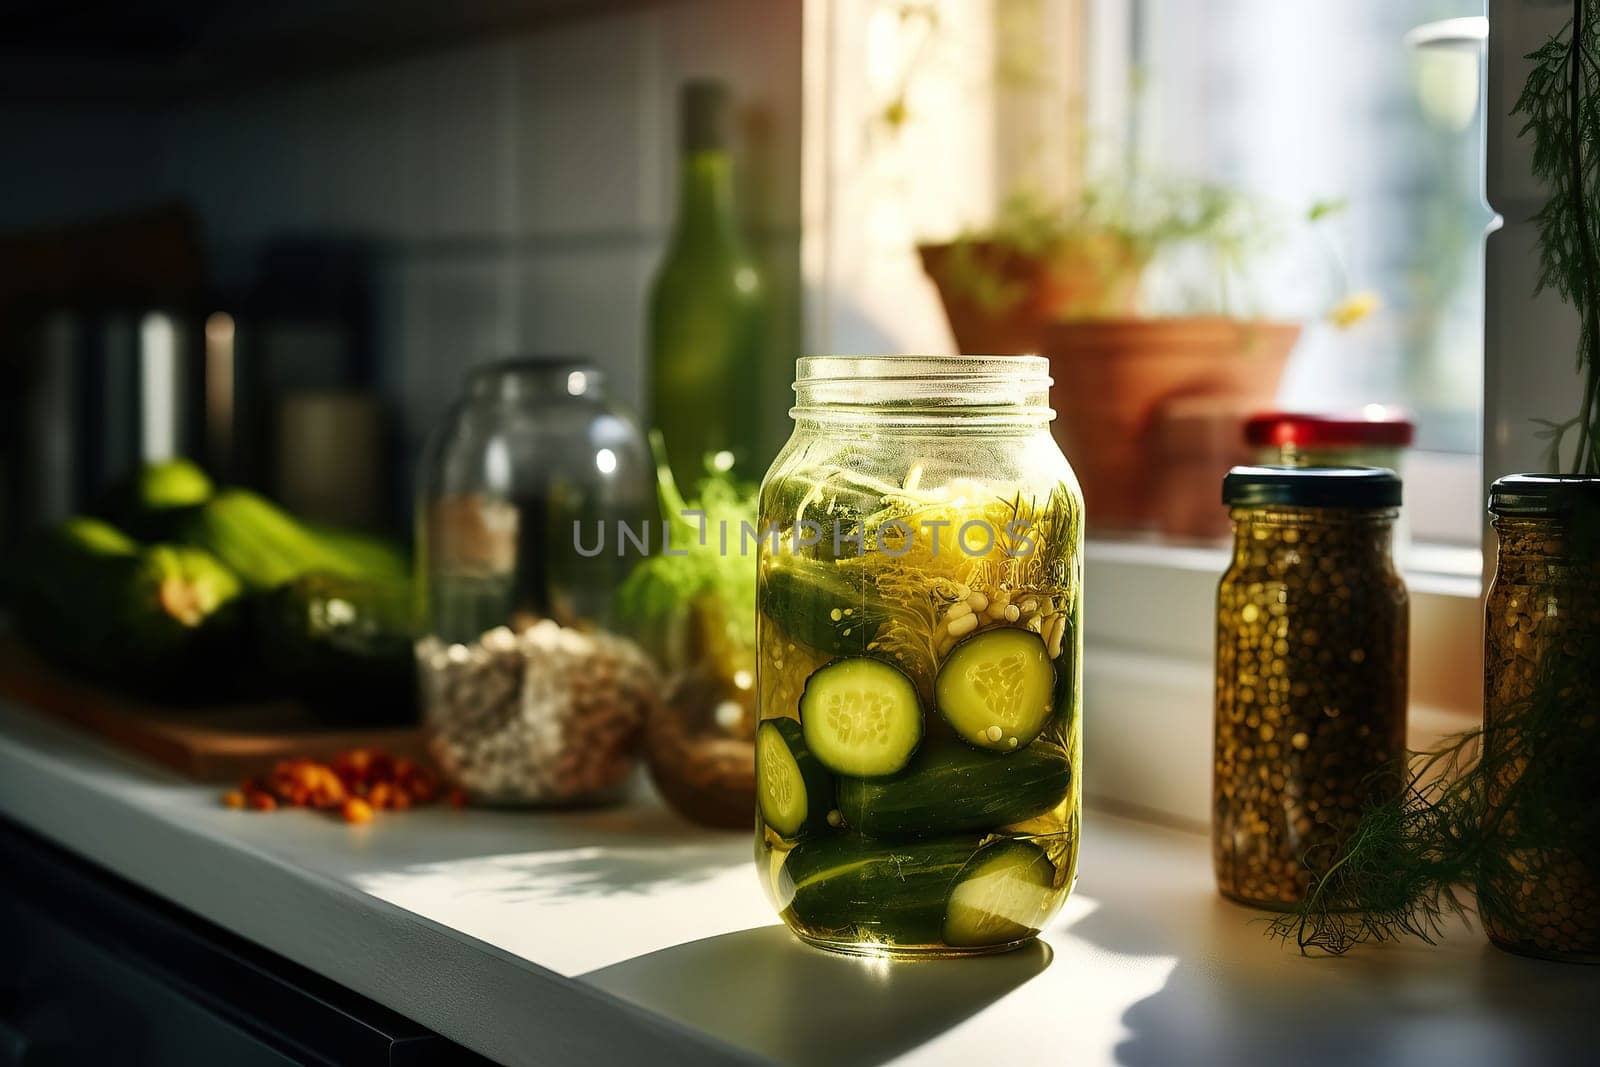 Jar with canned cucumbers, spices on a wooden board after cooking.